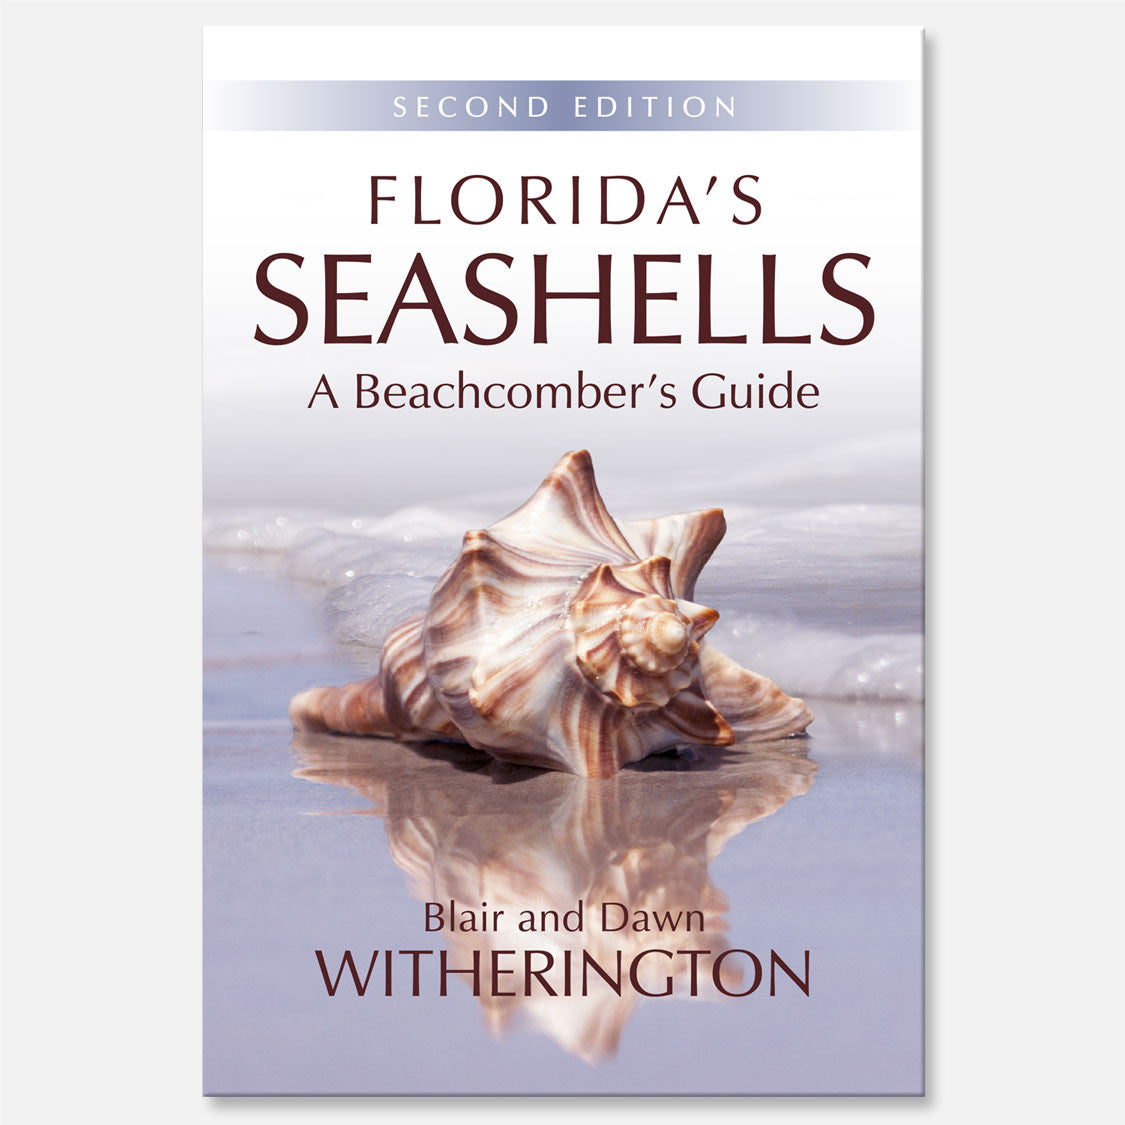 Florida's Seashells (2nd Edition) by Blair and Dawn Witherington